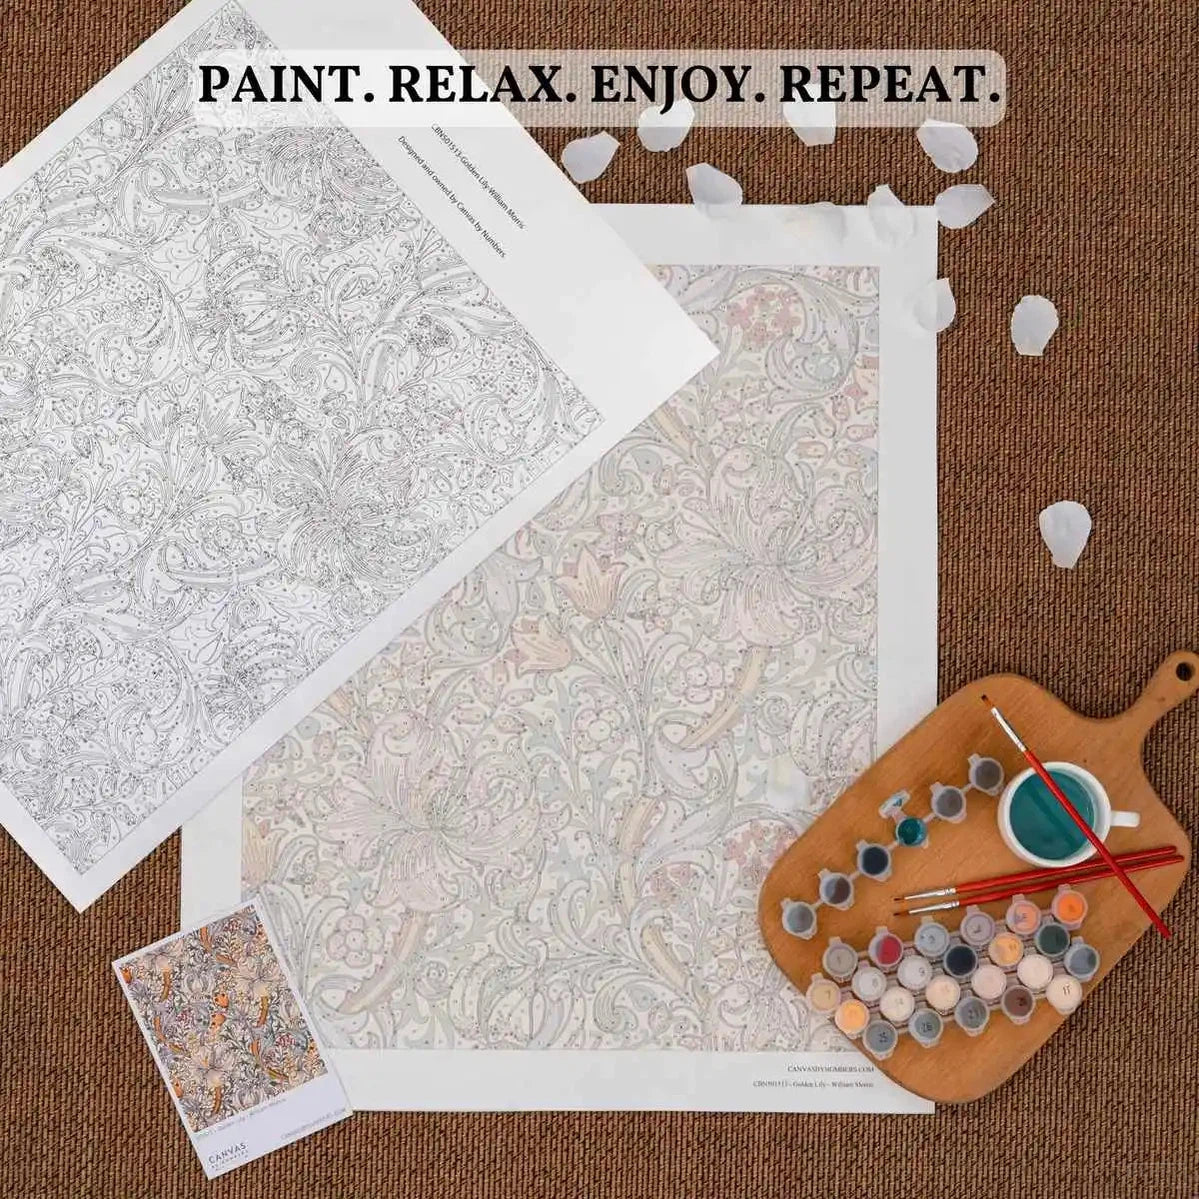 Les Iris - Paint by Numbers-You'll love our Les Iris - Vincent Van Gogh paint by numbers kit. Shop more than 500 paintings at Canvas by Numbers. Up to 50% Off! Free shipping and 60 days money-back.-Canvas by Numbers